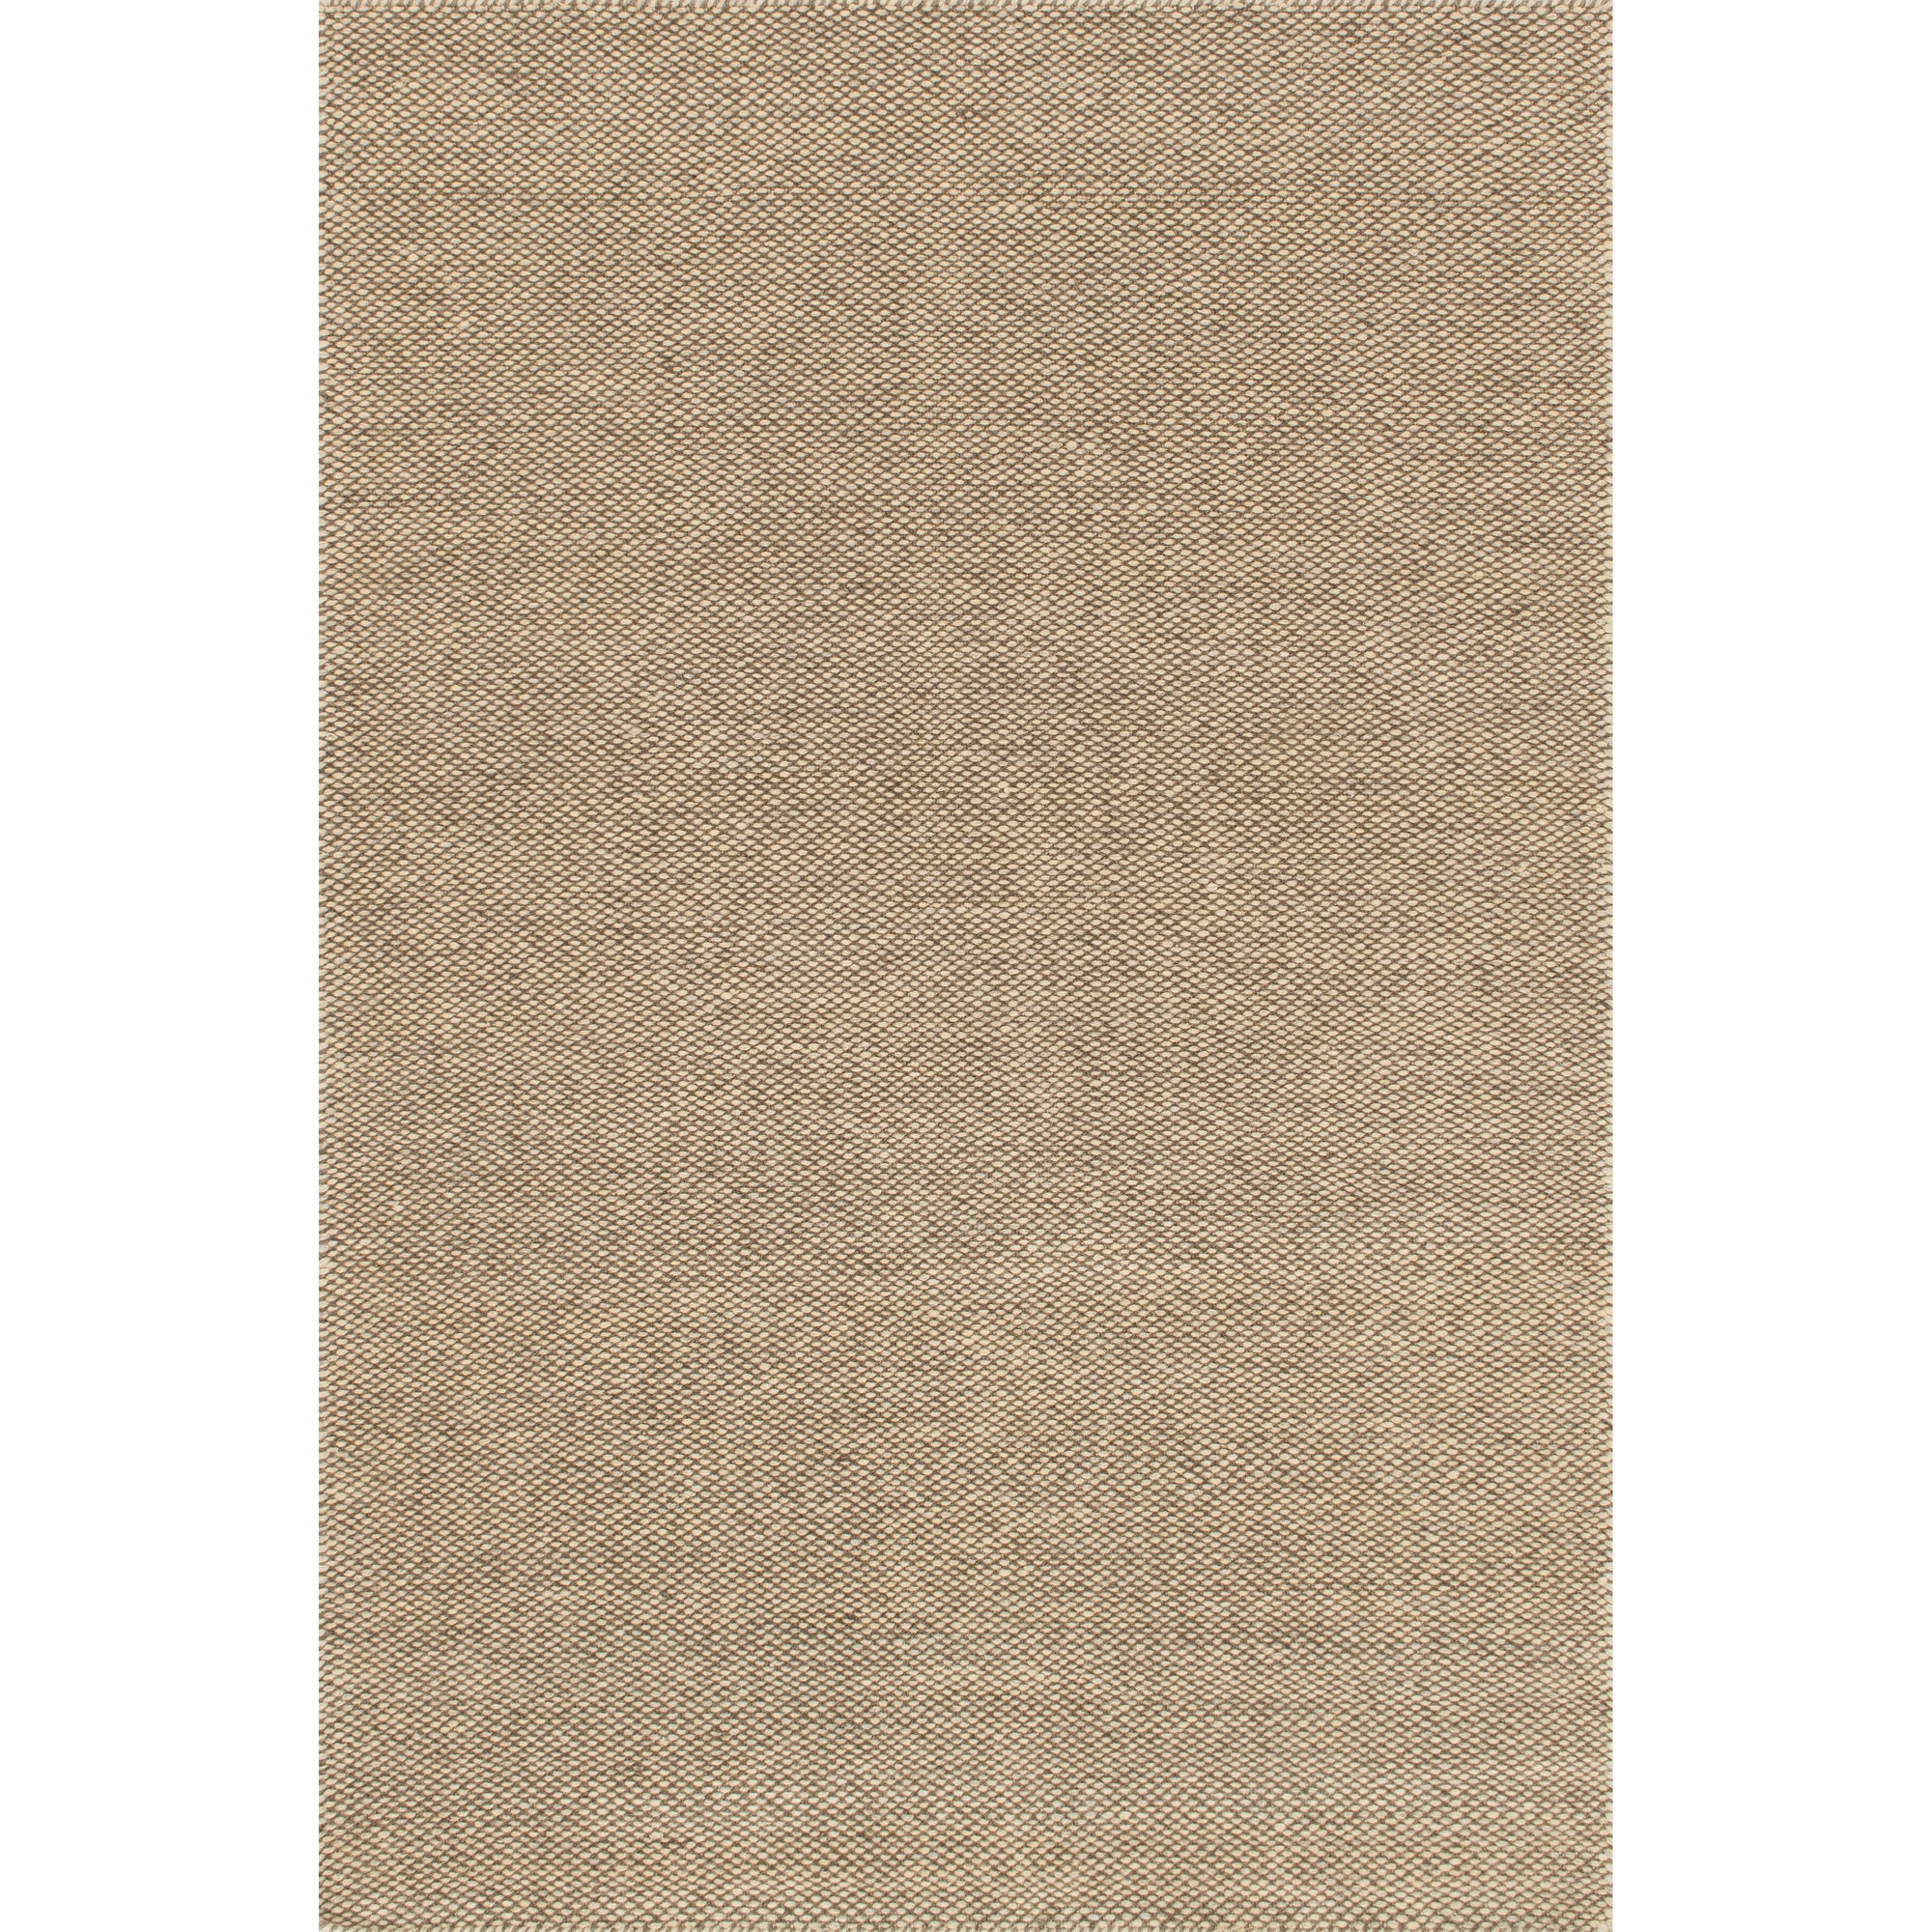 Rugs by Roo Loloi Oakwood Natural Area Rug in size 3' 6" x 5' 6"